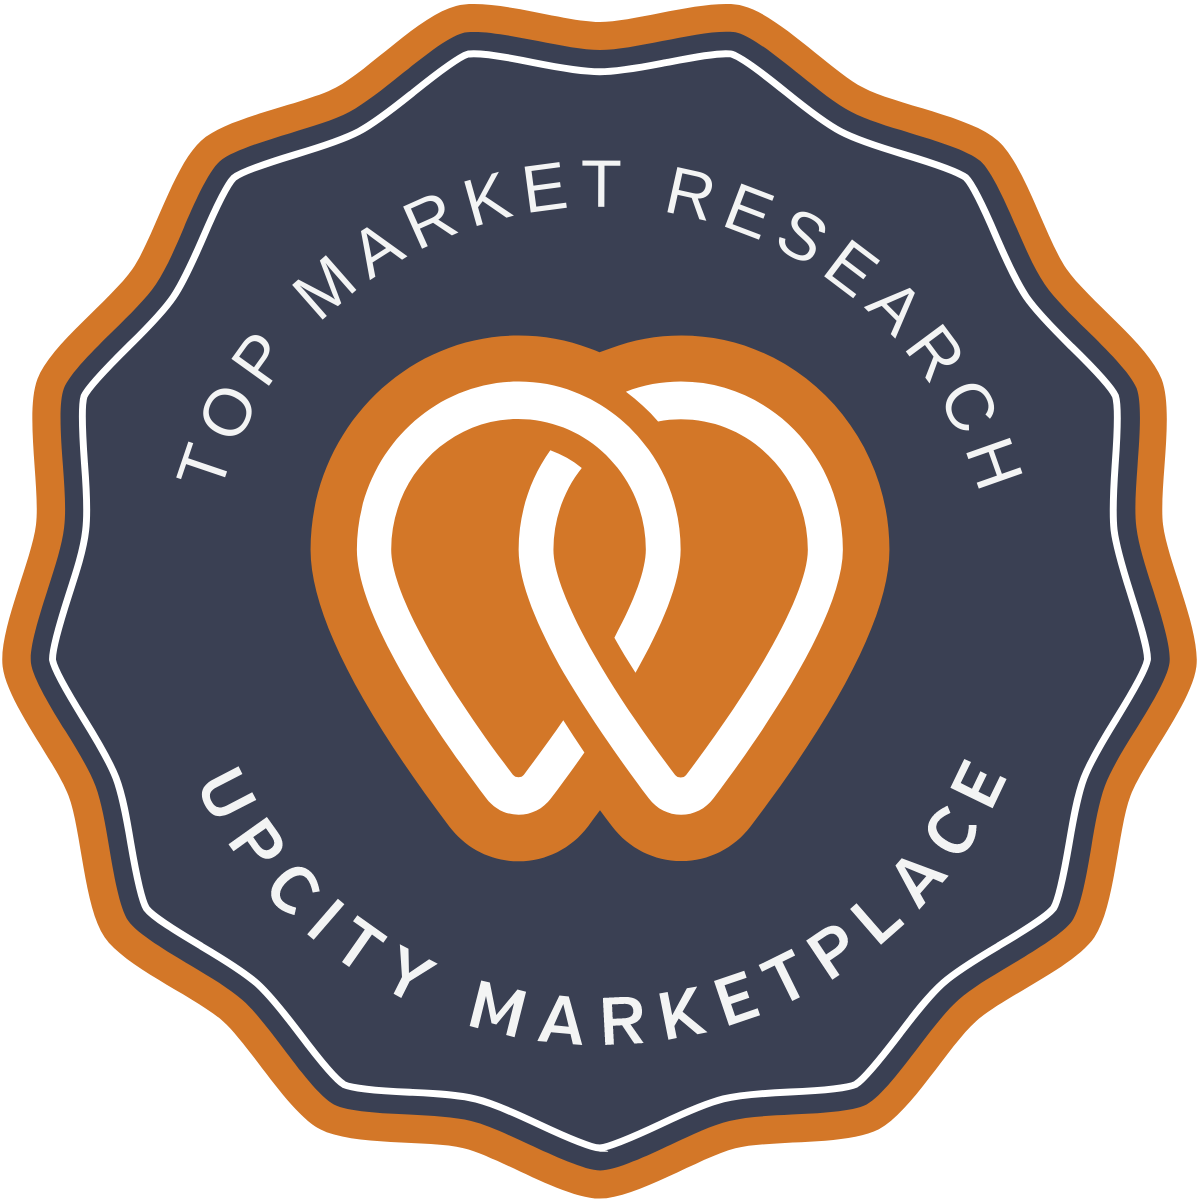 TOP MARKET RESEARCH